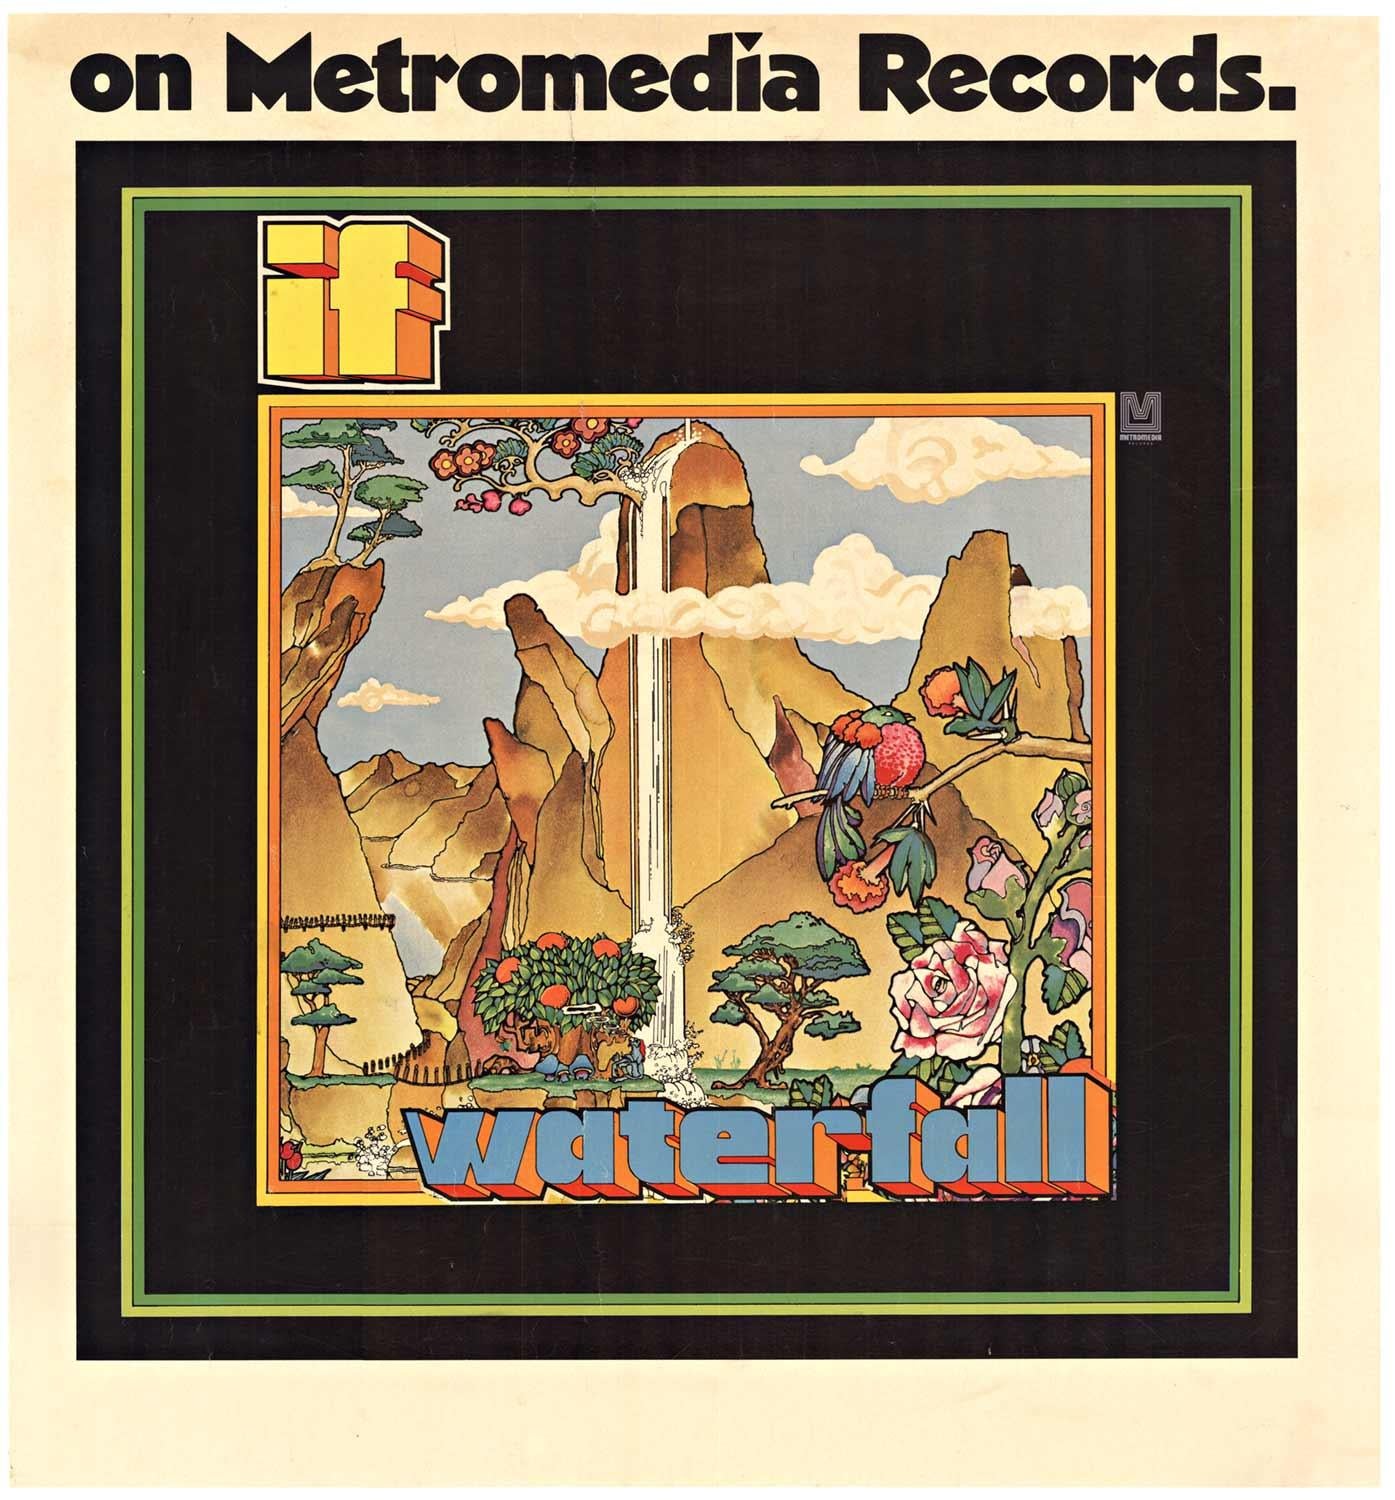 Unknown Landscape Print - Original "If Waterfall" on Metromedia Records vintage record shop vintage poster